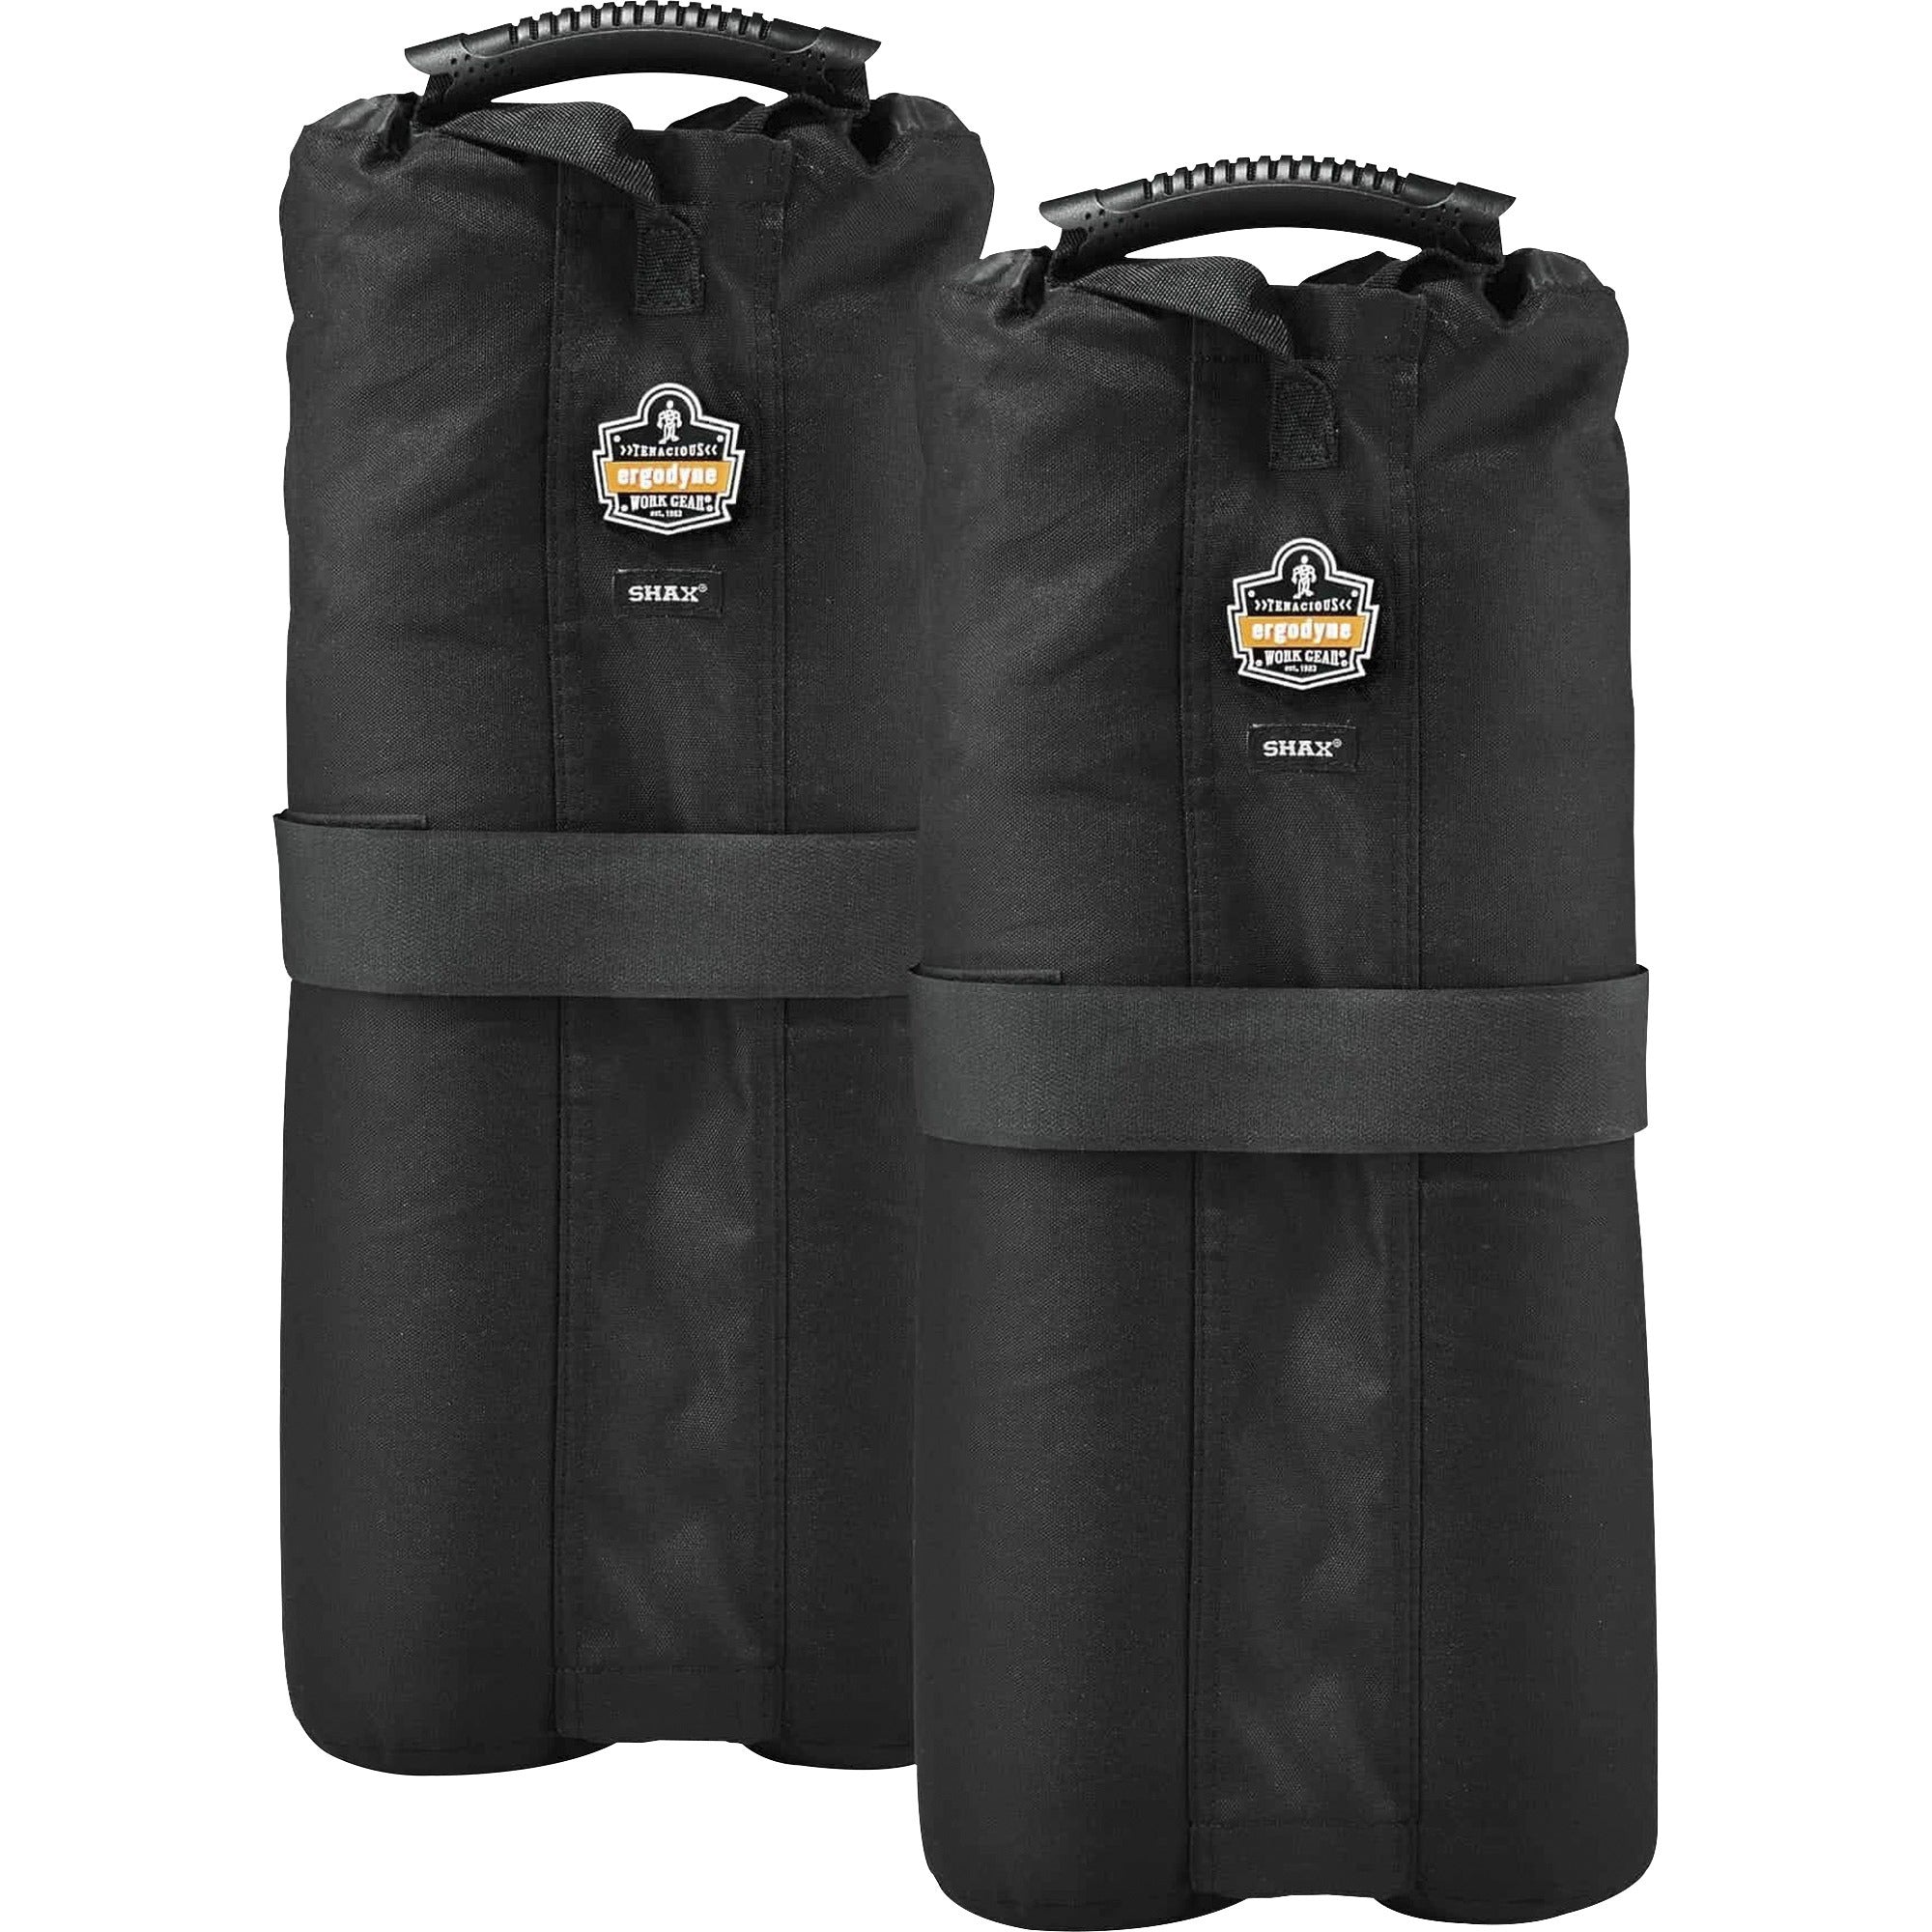 shax-6094-one-size-tent-weight-bags-40-lb-capacity-10-width-x-7-length-black-polyurethane-polyester-1each-tent_ego12994 - 1